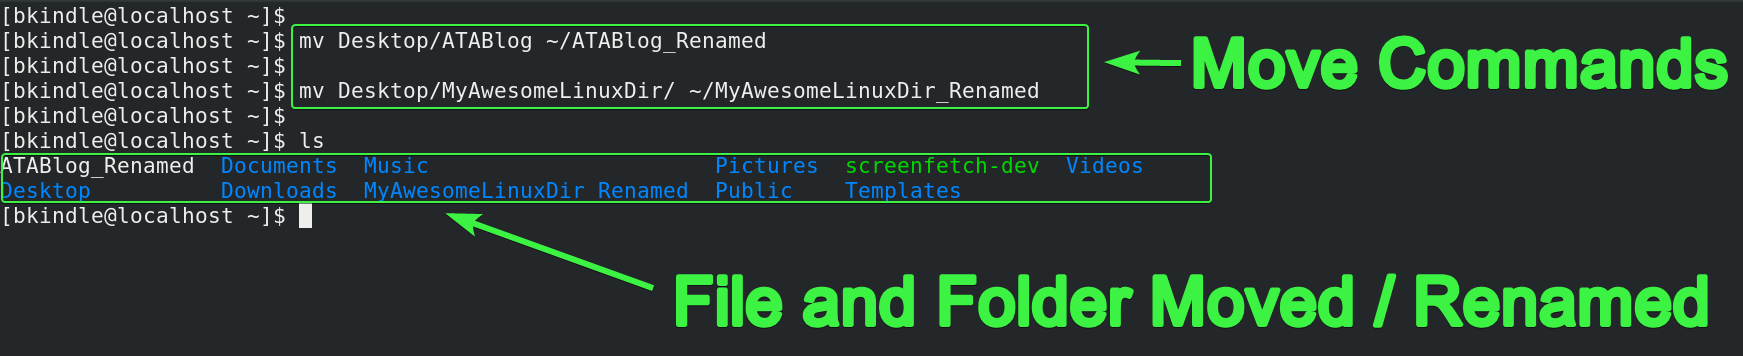 Moving files and folders with mv command